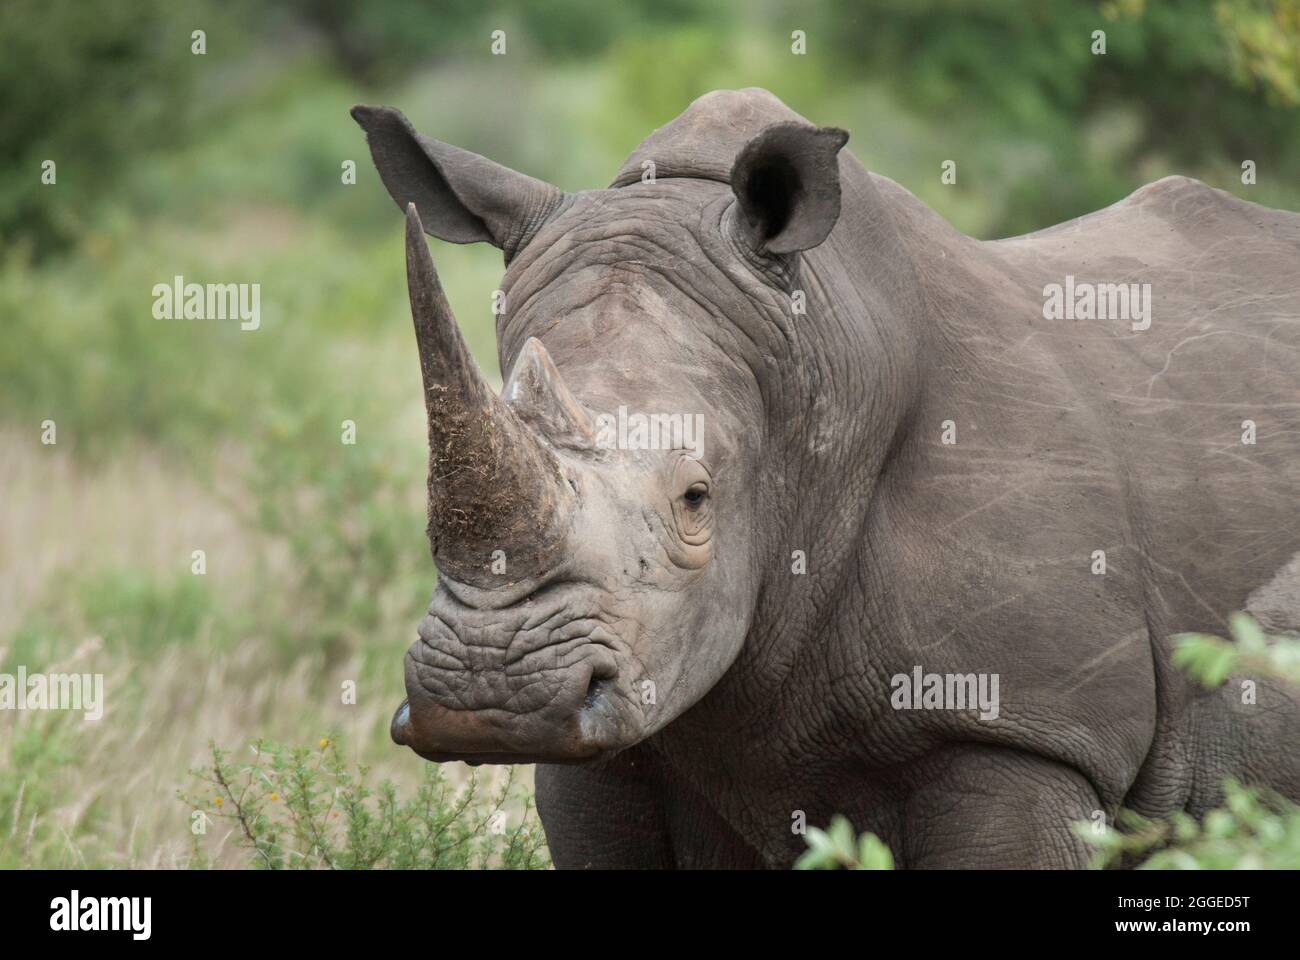 Head and shoulders of large Southern White Rhinoceros (Ceratotherium simum simum) with green vegetation behind. Kruger National Park, South Africa. Stock Photo